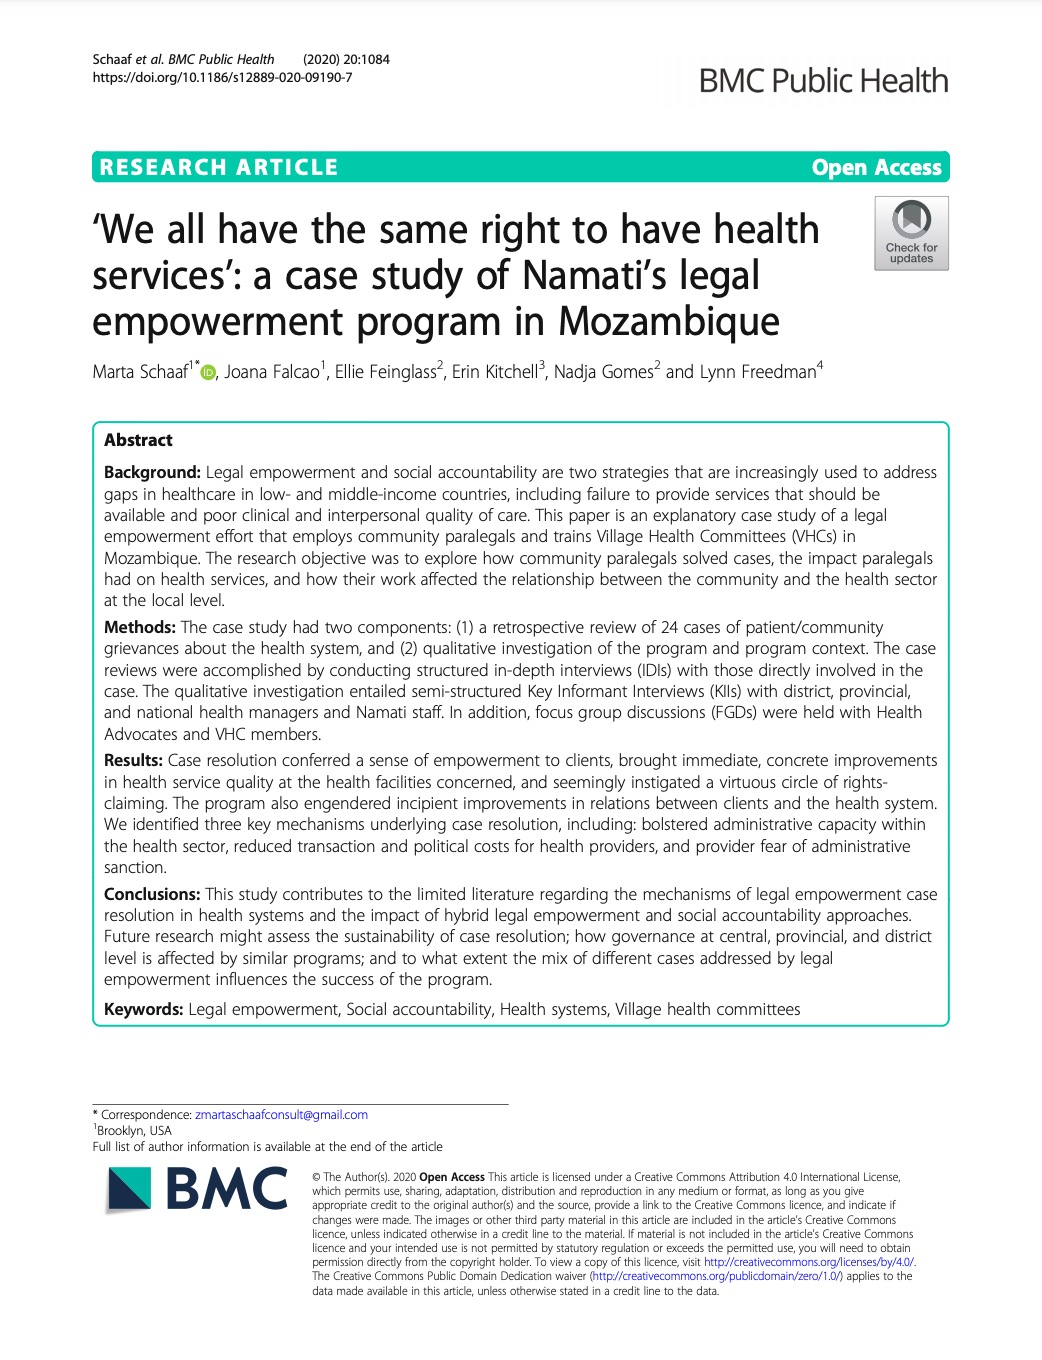 ‘We all have the same right to have health services’: a case study of Namati’s legal empowerment program in Mozambique 